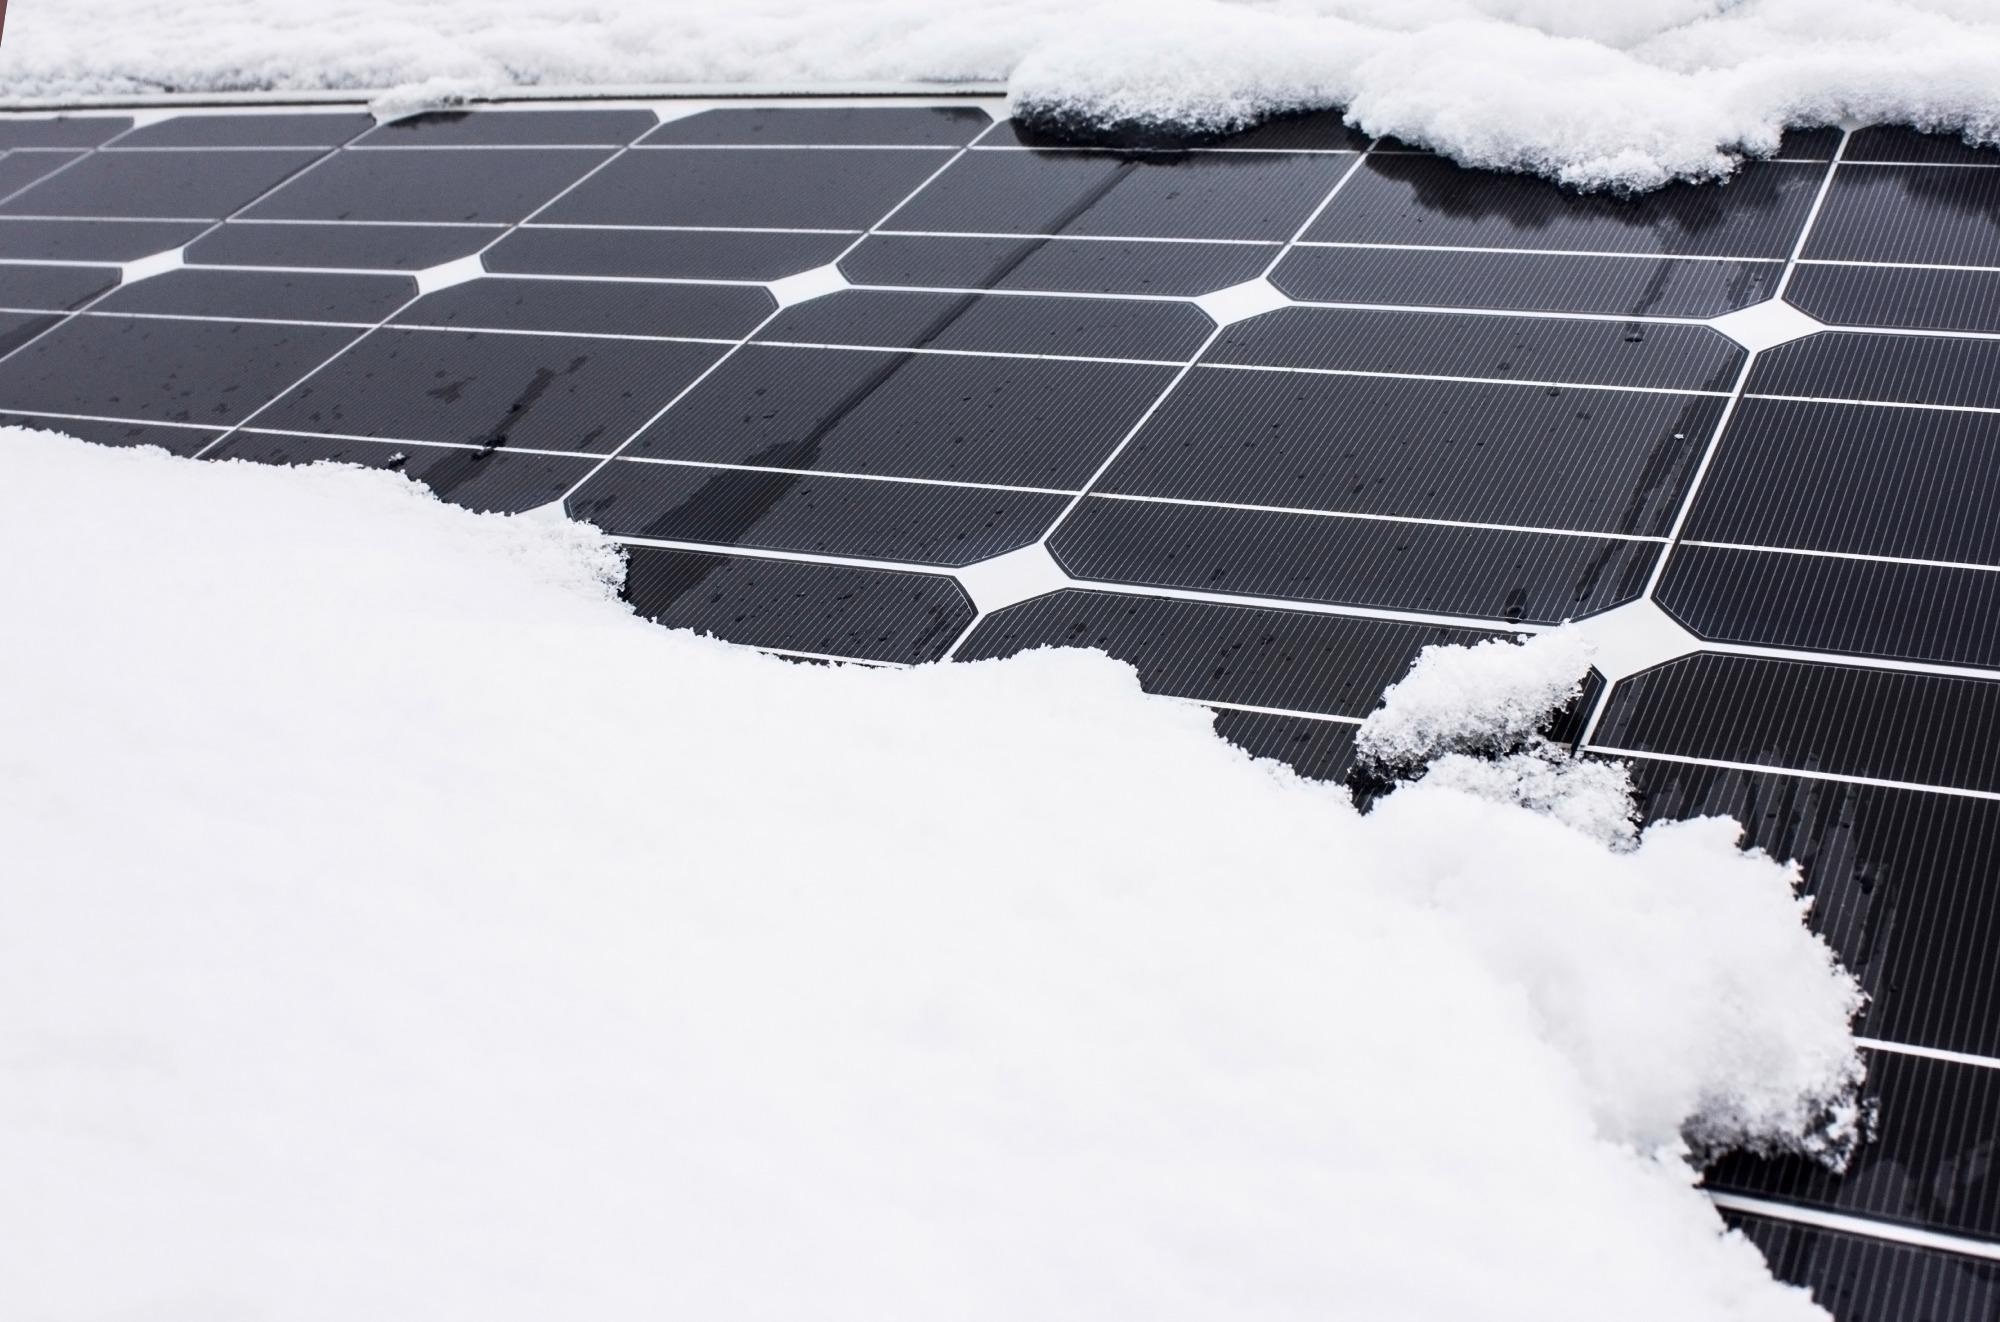 Novel Spray-On Coating to Help Solar Panels Shed Off Snow in Cold Climates.